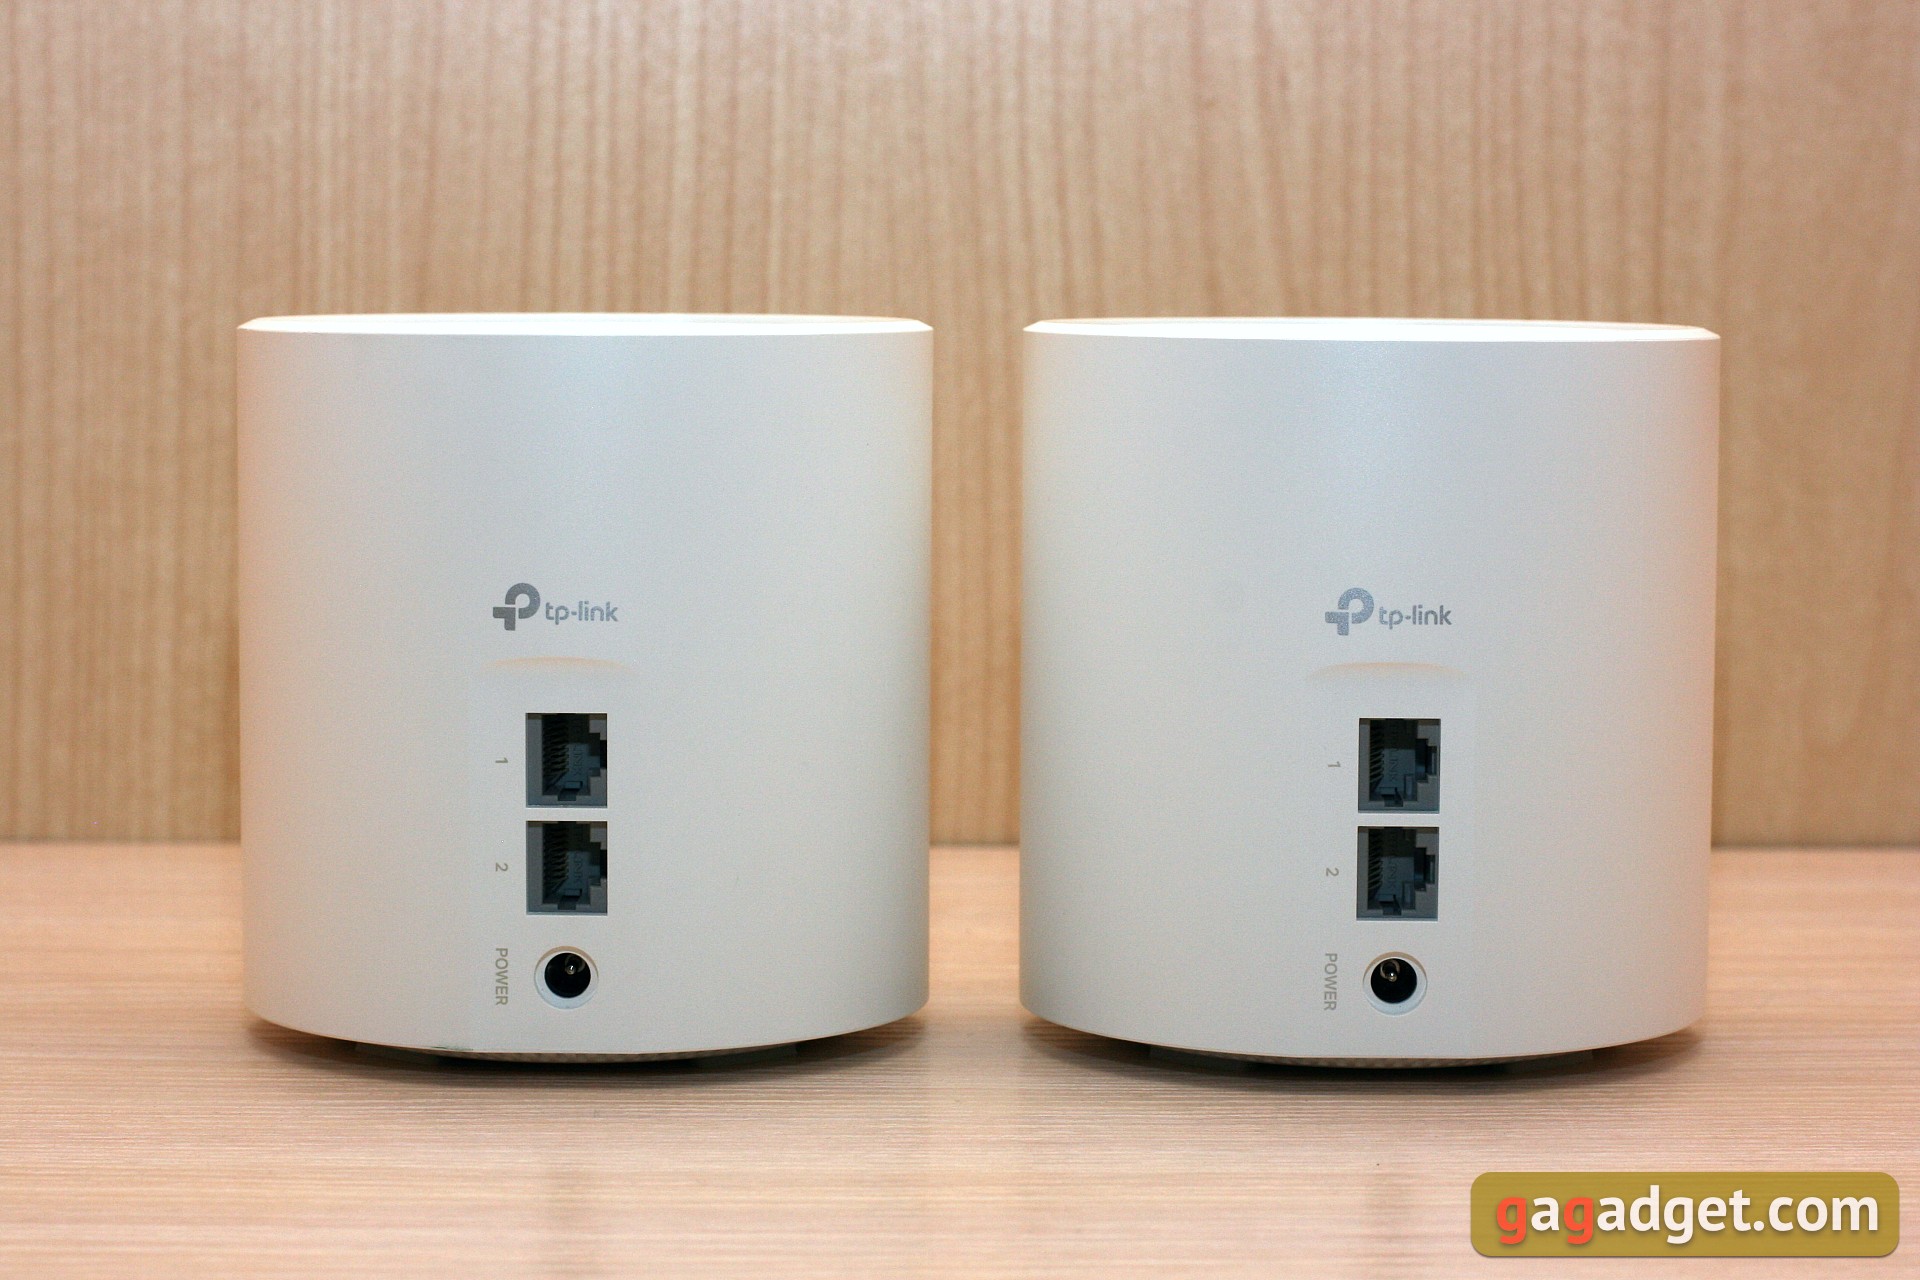 TP-Link Deco X60 Review: Fast and Stylish AX3000 Standard Mesh